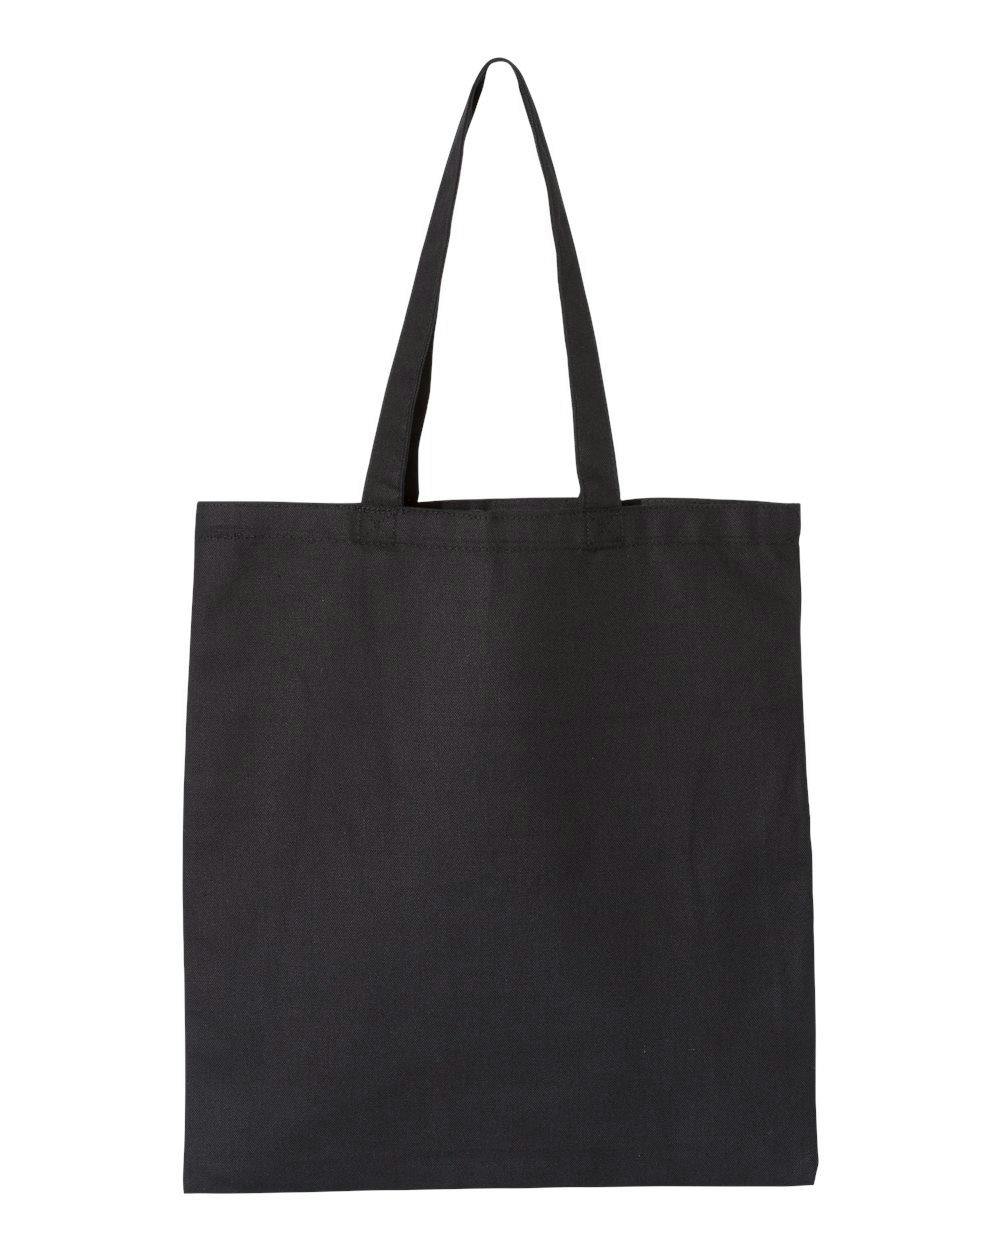 Image for Tote Bag - OAD113